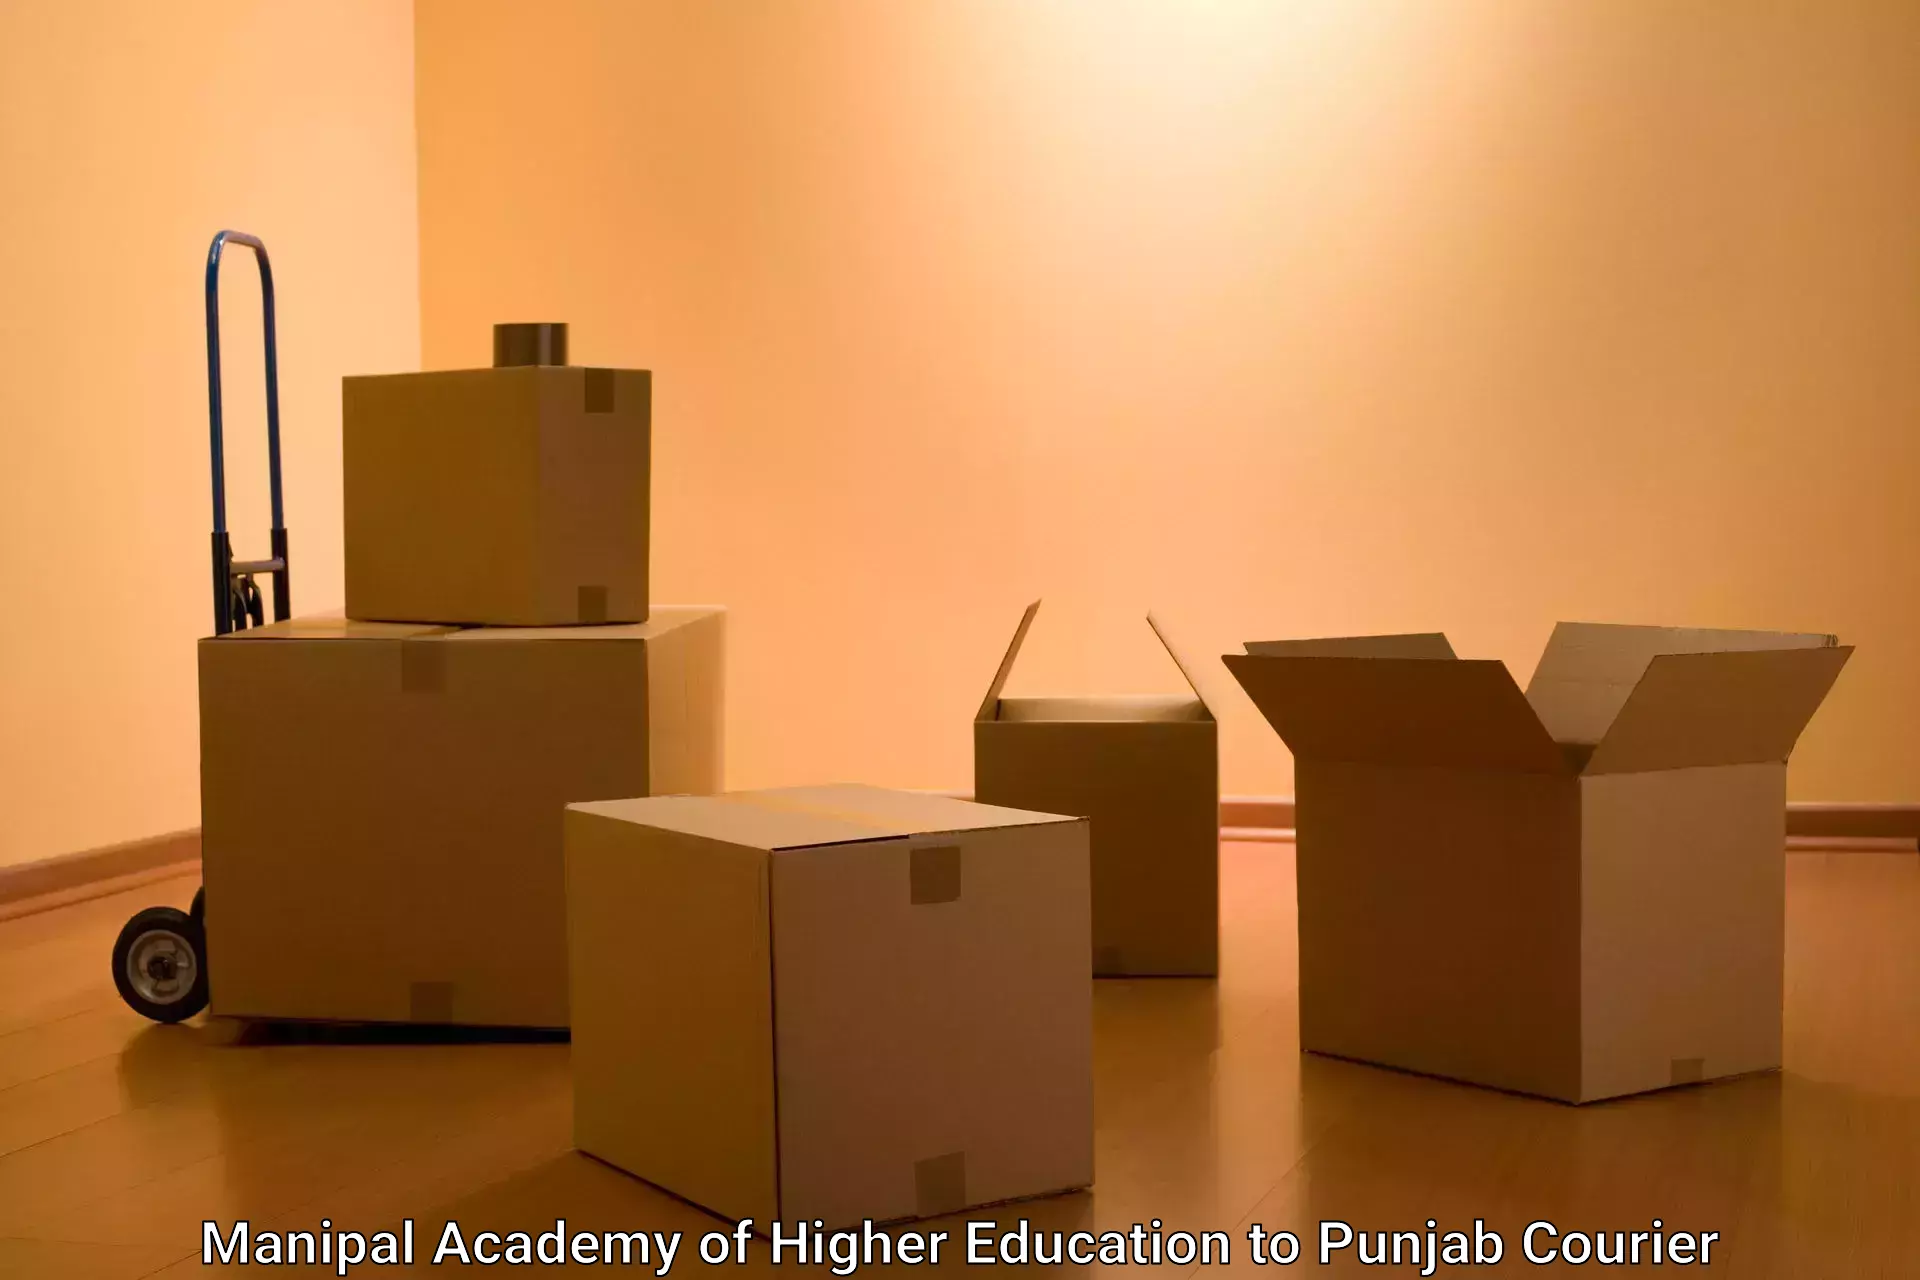 Urgent courier needs Manipal Academy of Higher Education to Bathinda